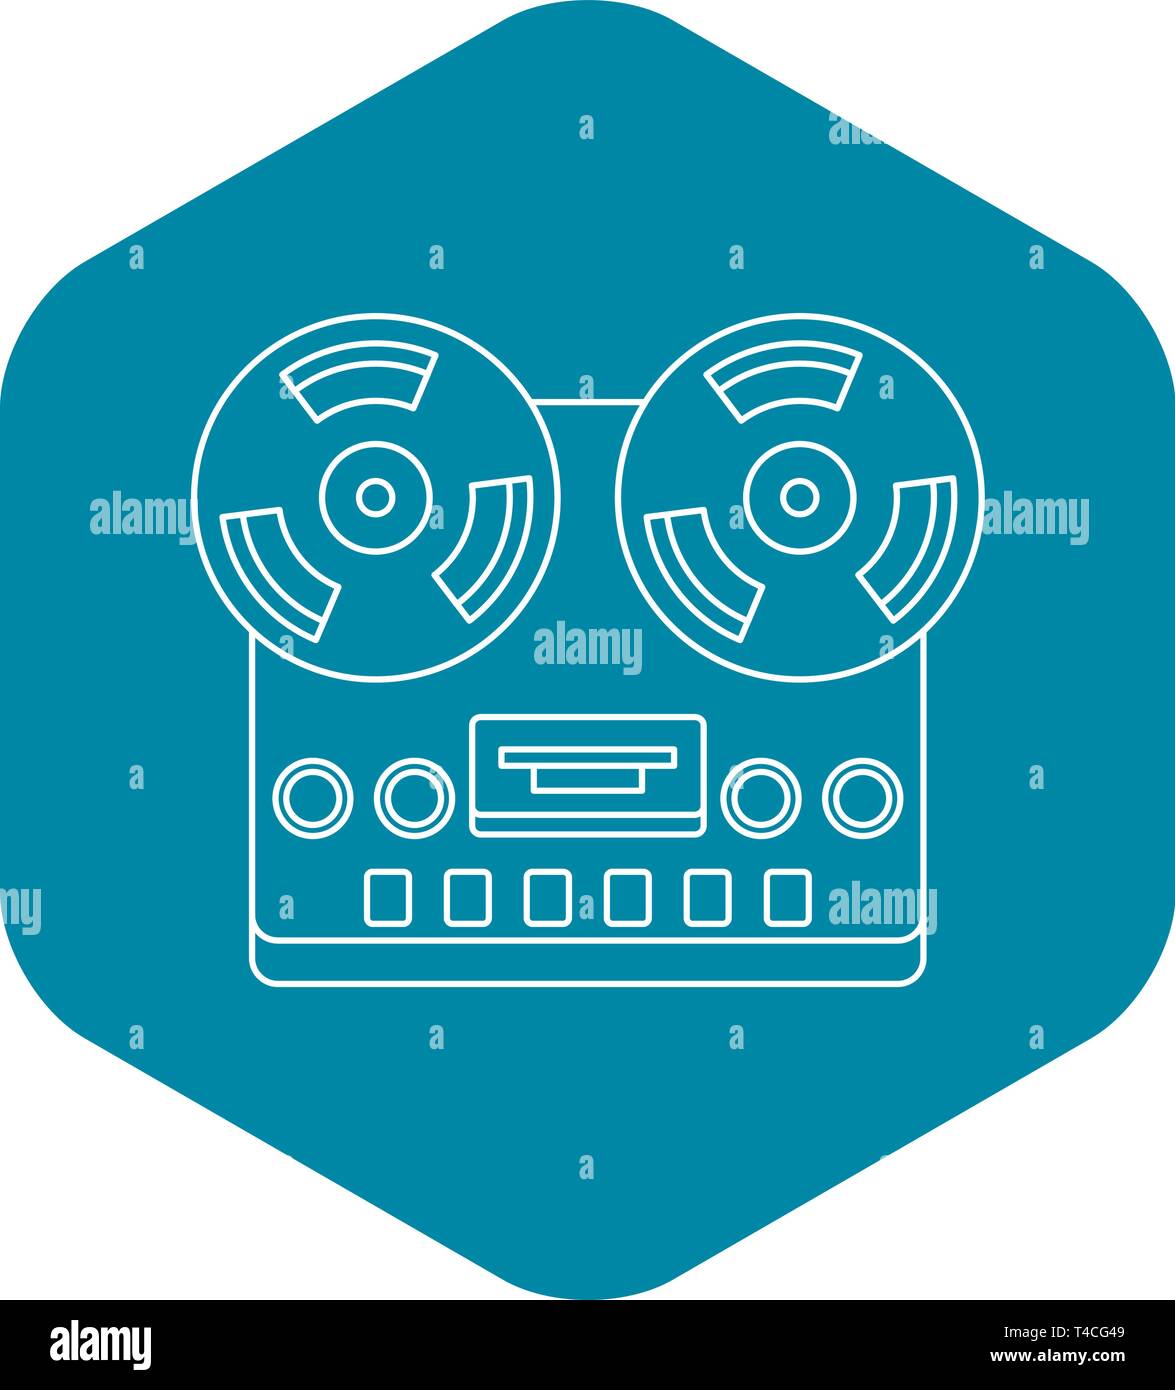 Analog stereo open reel tape deck recorder icon Stock Vector